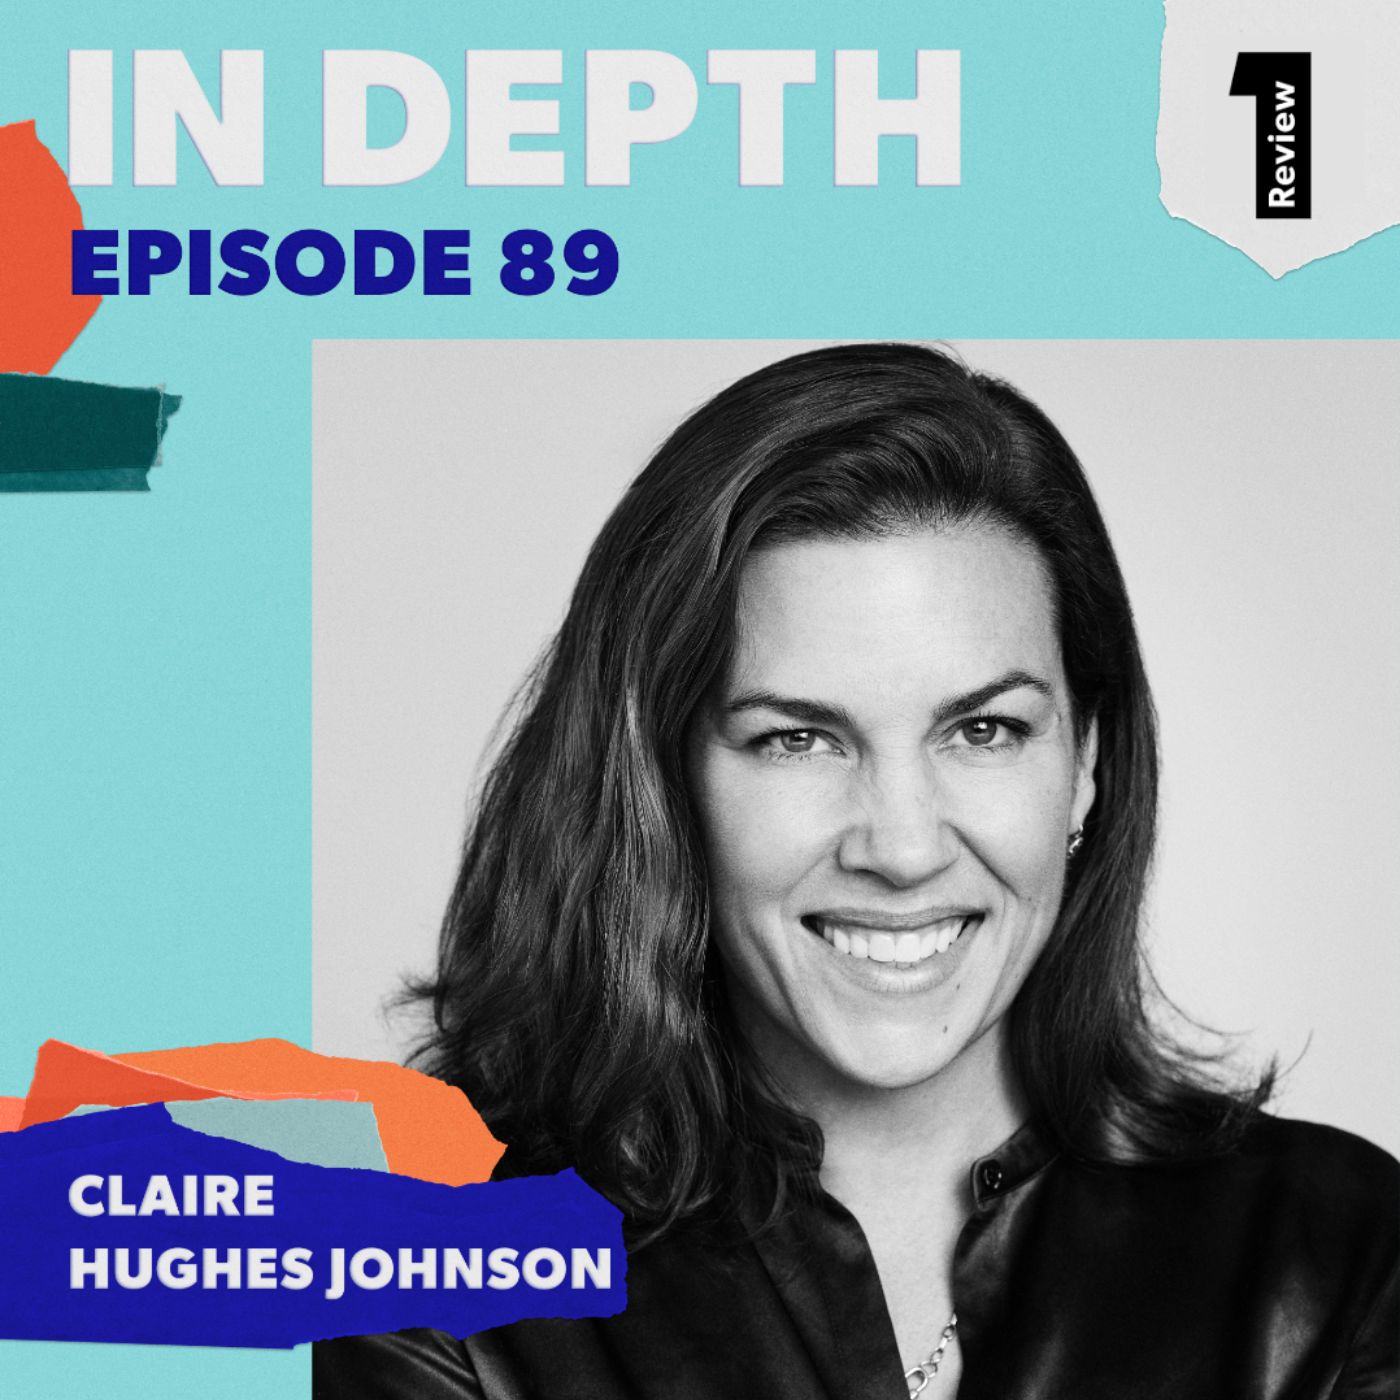 Claire Hughes Johnson on being a “learning organism” during Stripe’s growth, and more scaling advice for leaders